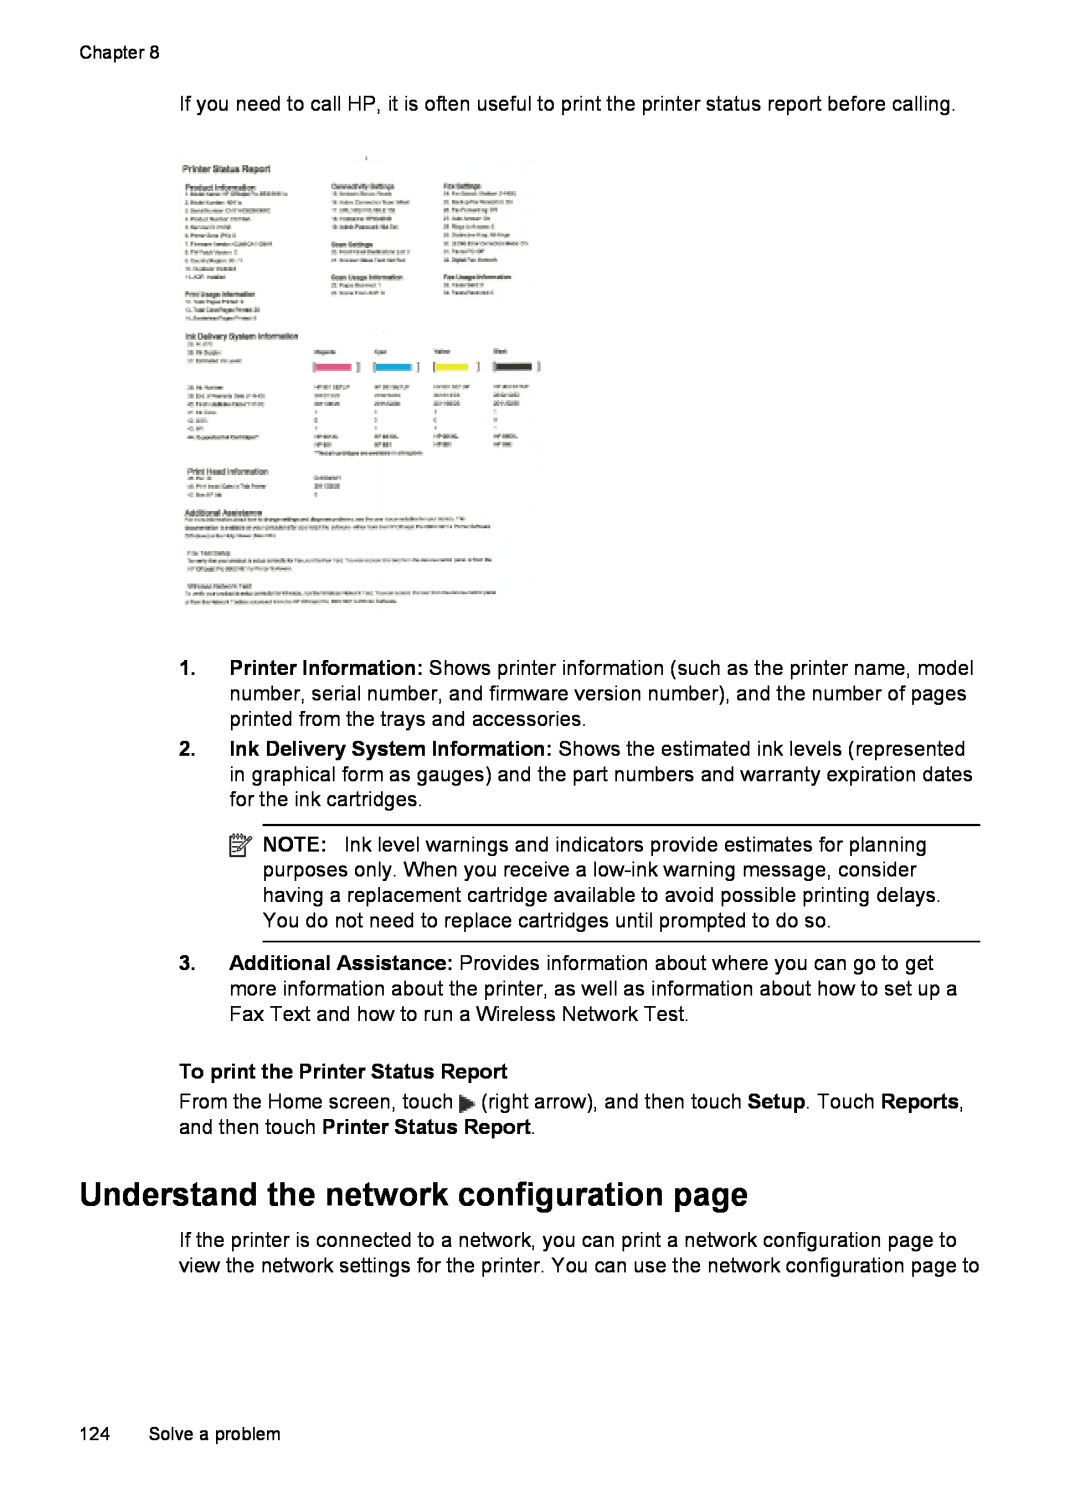 HP 6600 - H7 manual Understand the network configuration page, To print the Printer Status Report 